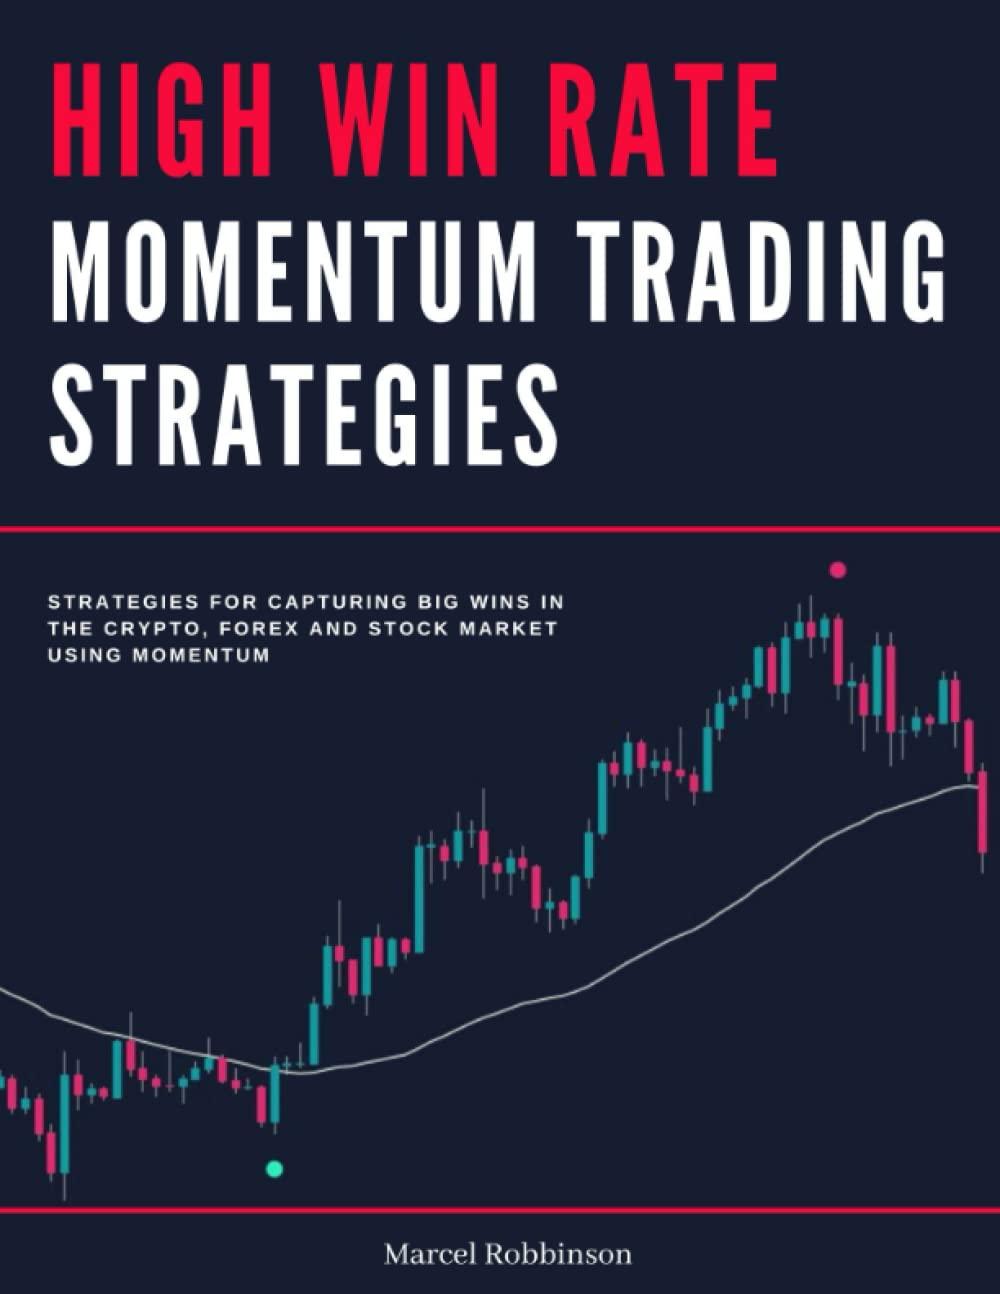 high win rate momentum trading strategies strategies for capturing big wins in the crypto forex and stock